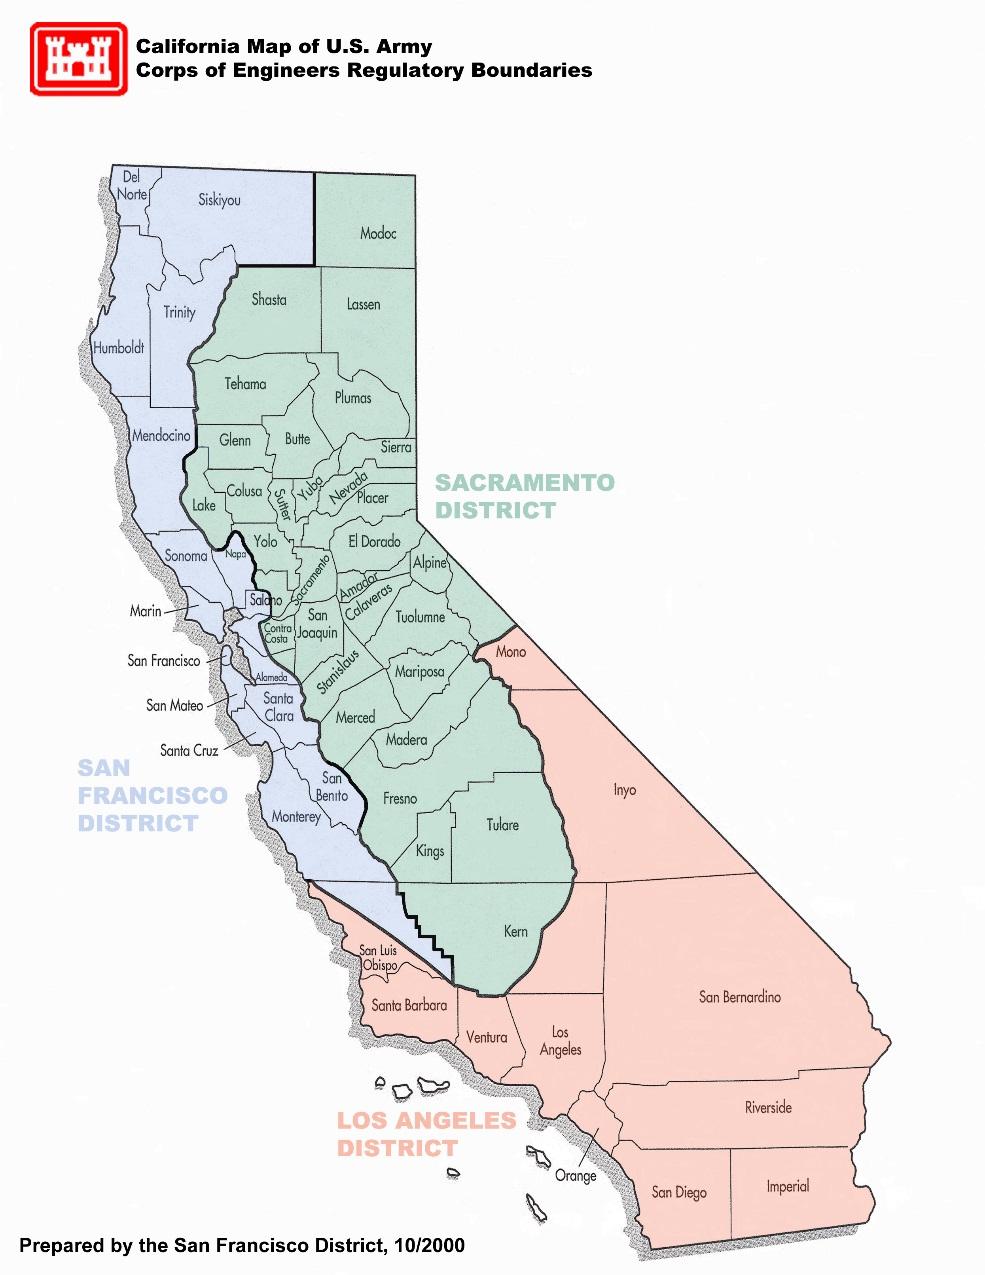 San Francisco District Regulatory Program Area of responsibility includes covering 700 miles of coastline from Oregon border to San Luis Obispo and inland to the central valley, an area of 34